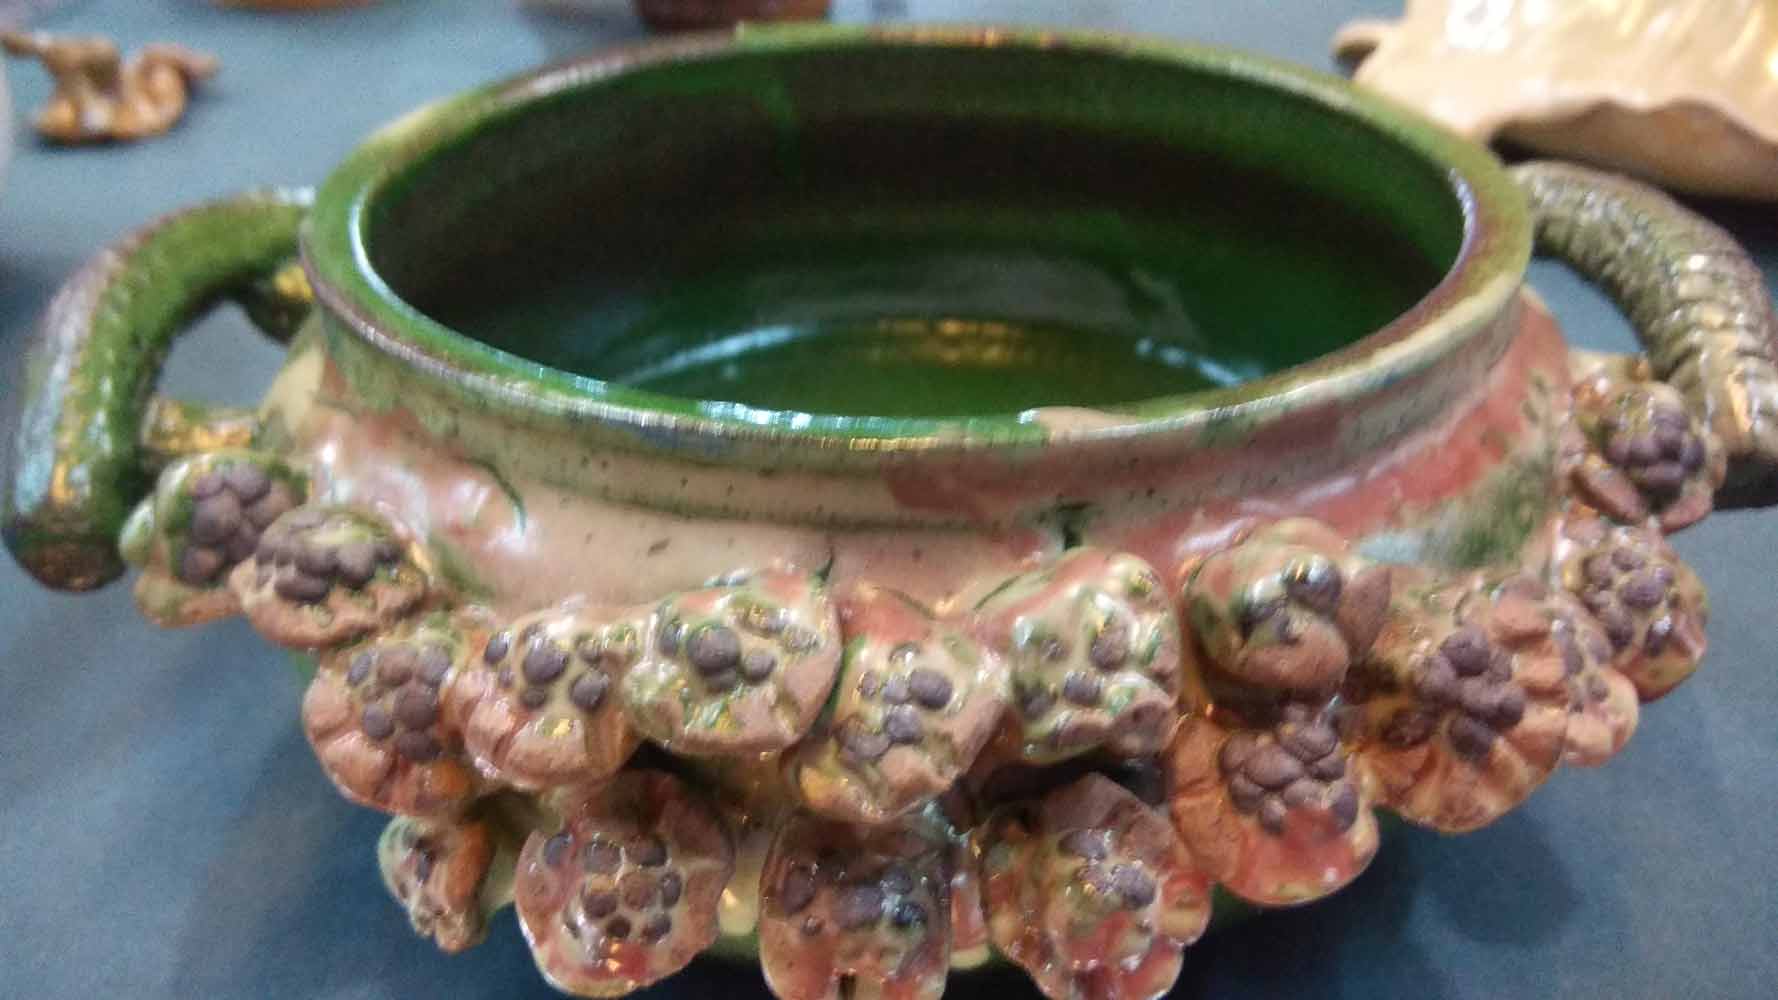 Pottery Sculpture with Ceramic"Flower Bowl Green" art by Neha Syyed